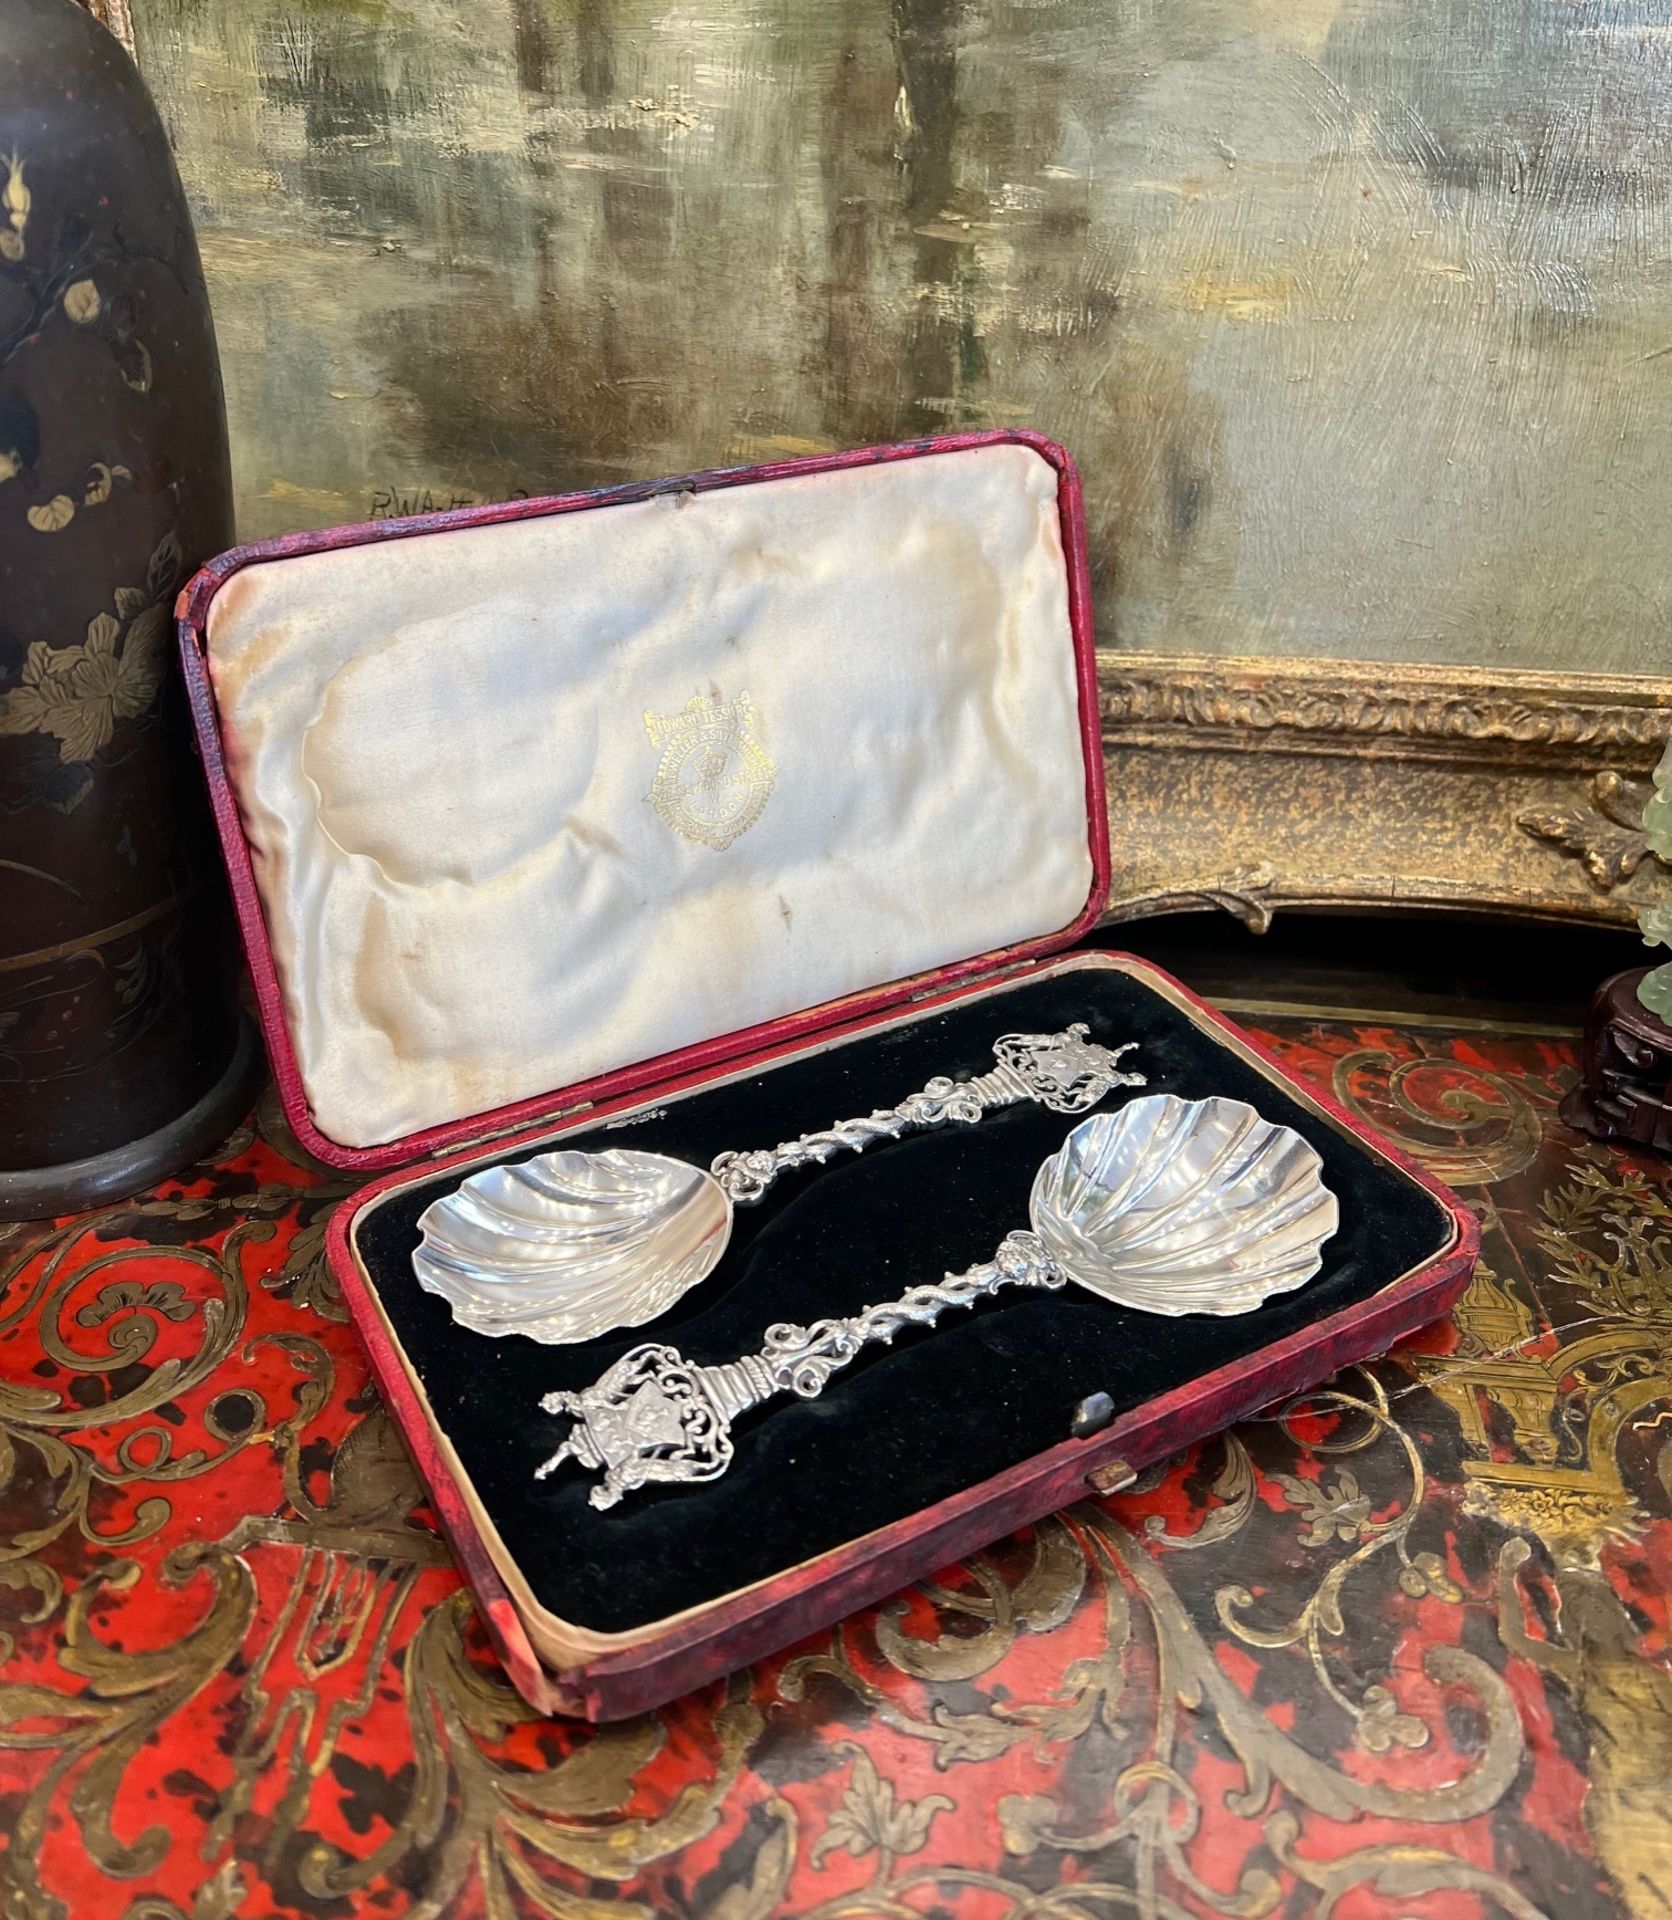 A SET OF SILVER SPOONS COMMEMORATING THE SALTER'S COMPANY 1887